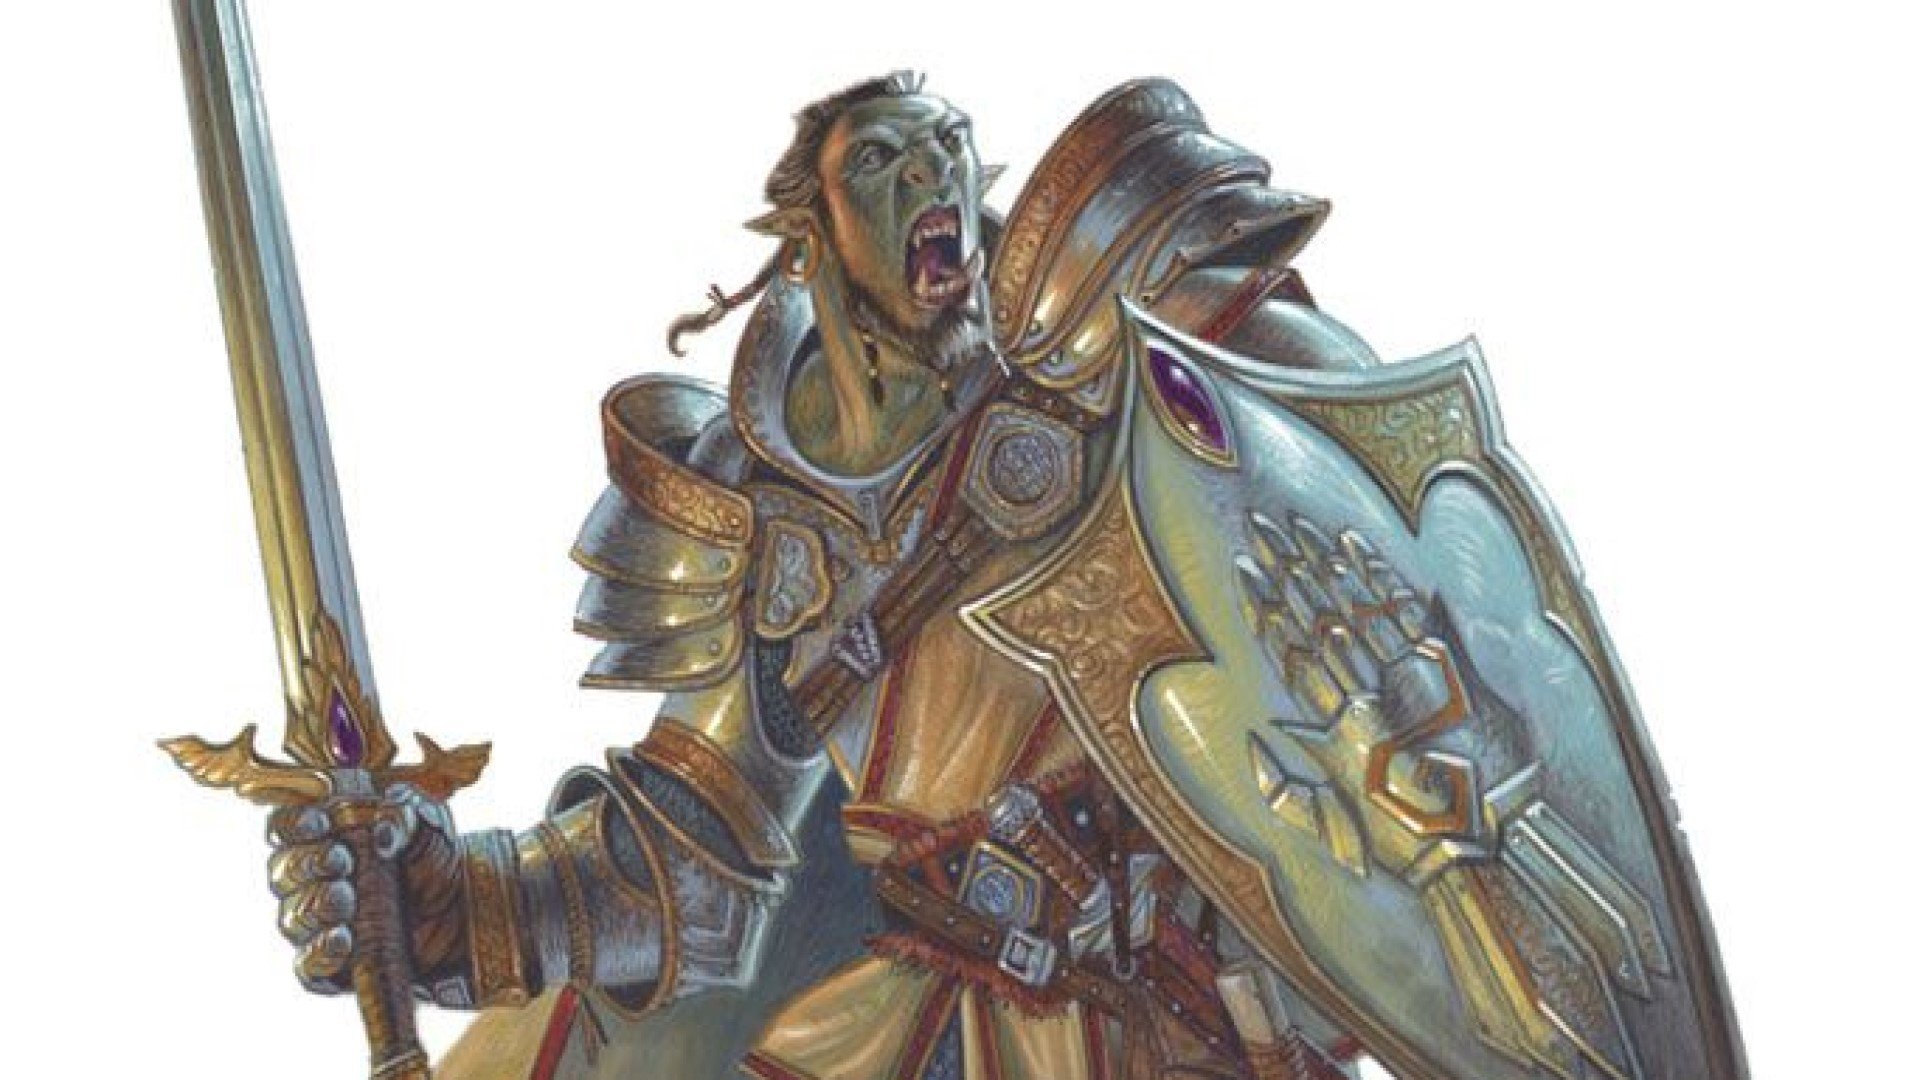 DnD Half-orc 5th Race Guide - Wizards of the Coast artwork showing a half-orc paladin with sword and shield